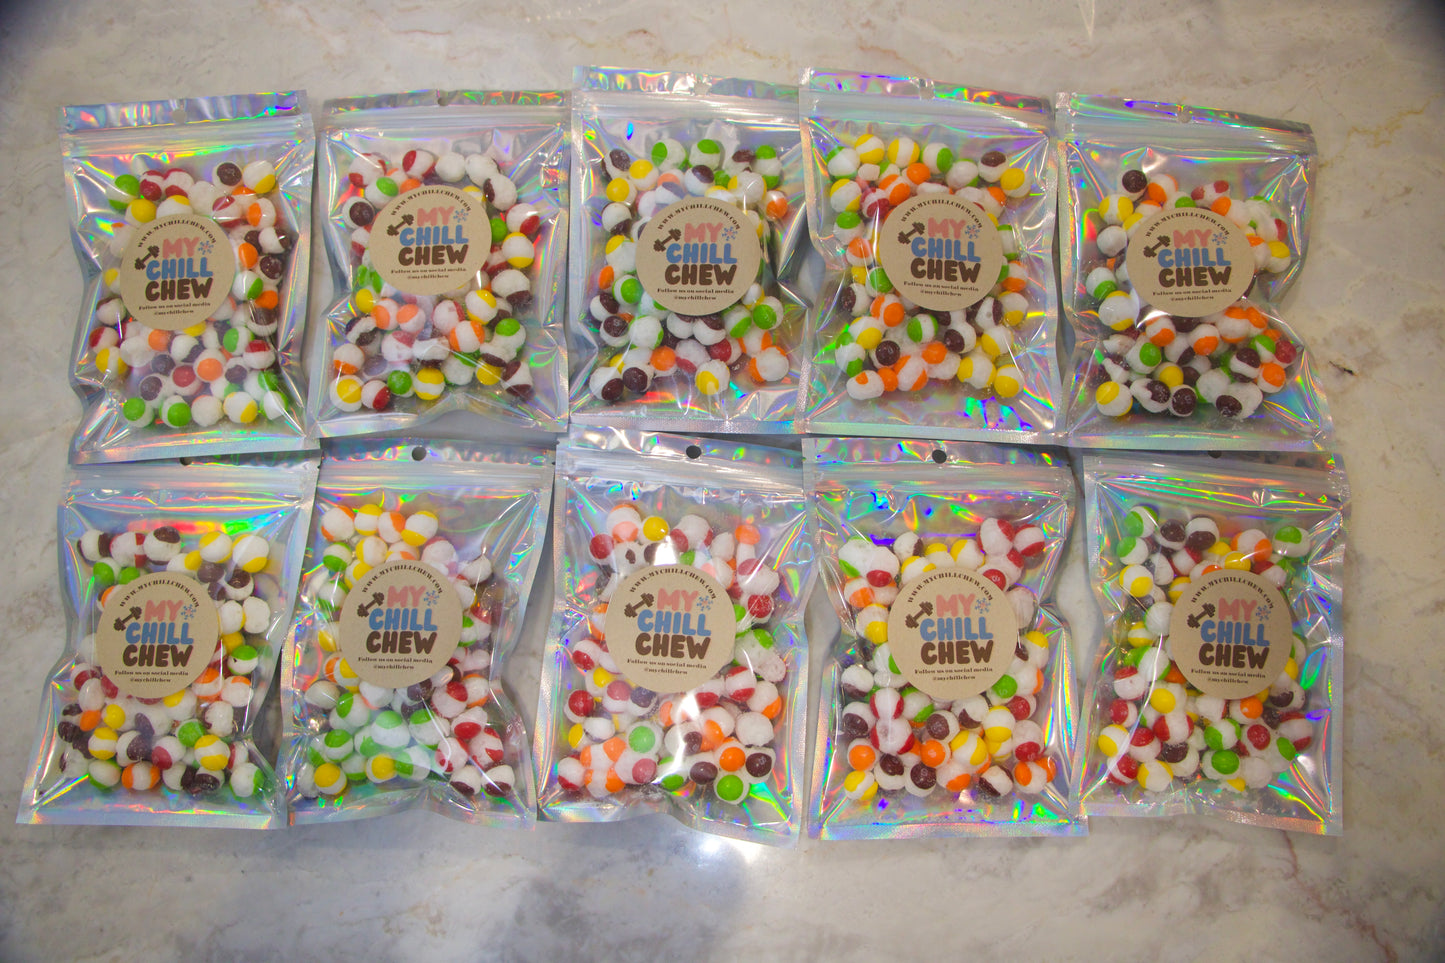 10 Skiffle Original Bags @ (70g/bag) - Shipping included